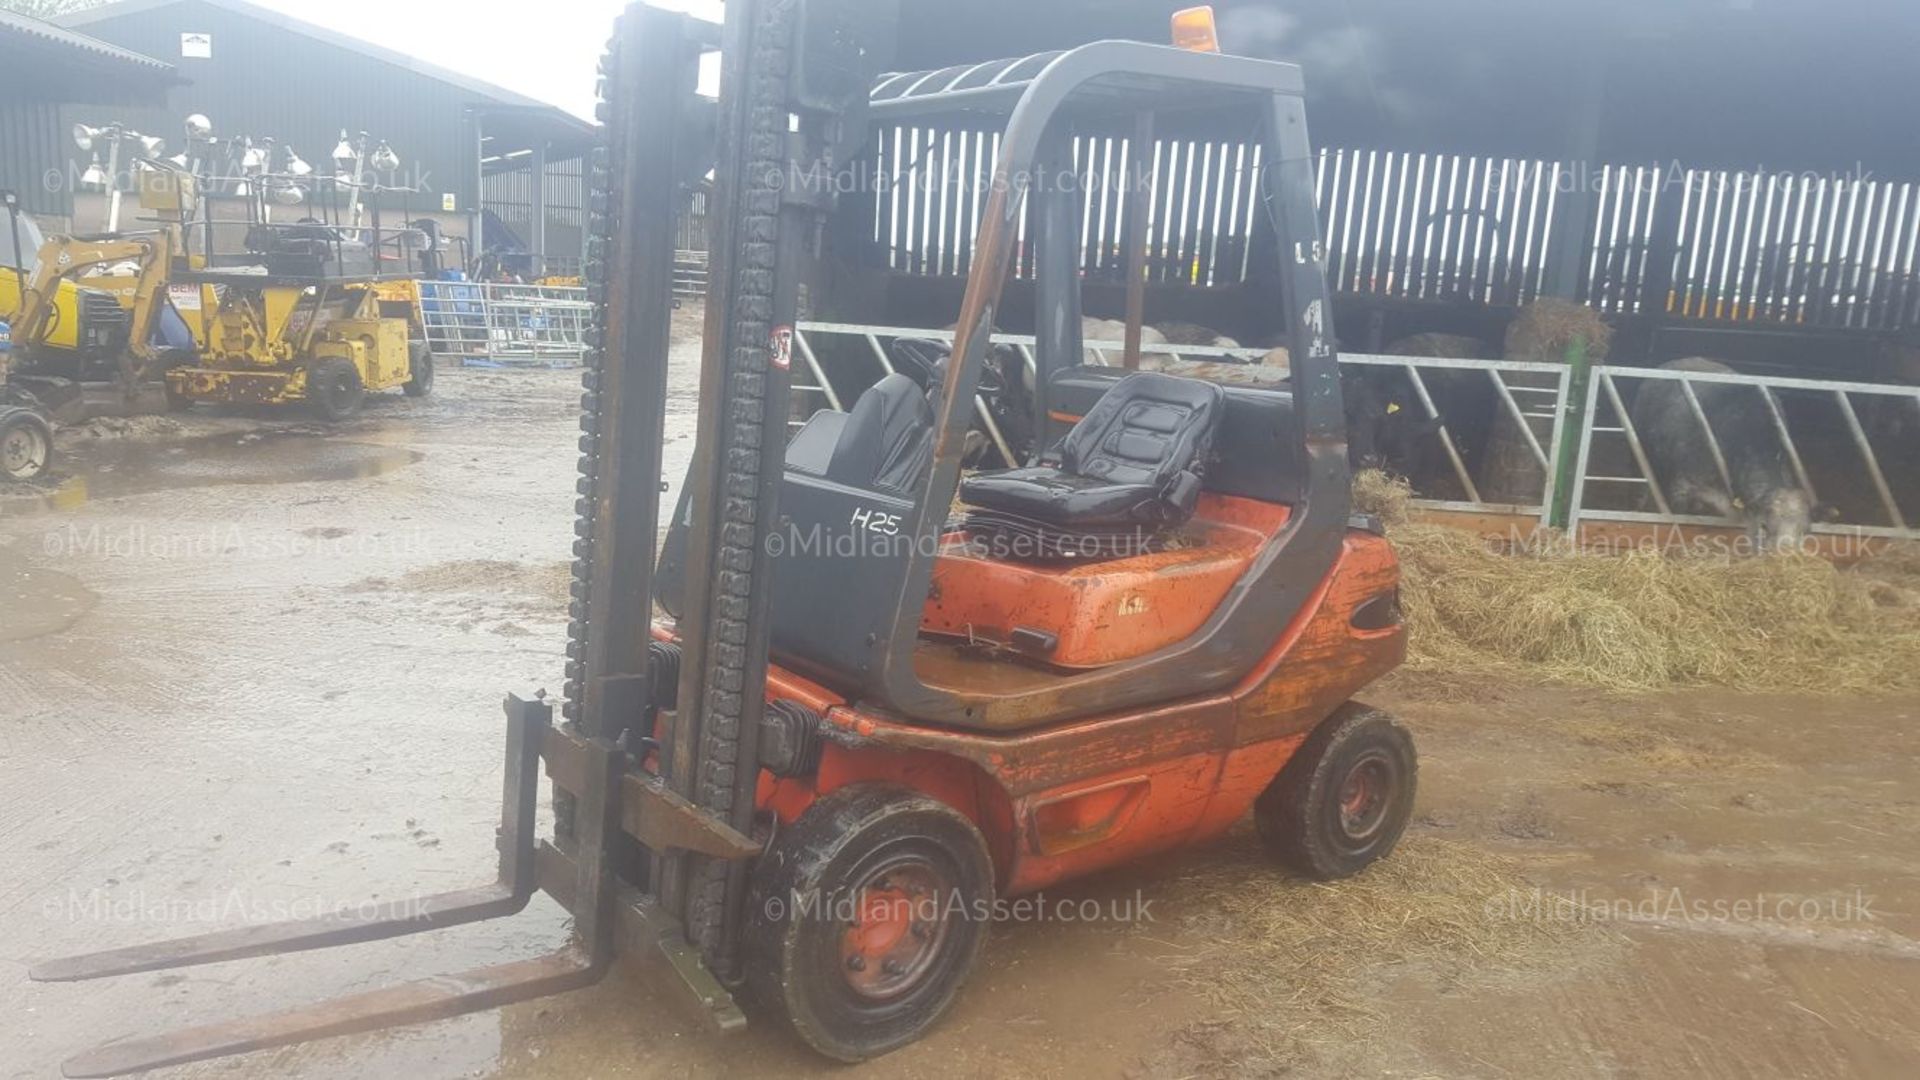 1994 LINDE H25D FLT FORKLIFT, STARTS, DRIVES AND LIFTS. 2.5 TON CAPACITY, LIGHT BEACONS *PLUS VAT* - Image 2 of 7